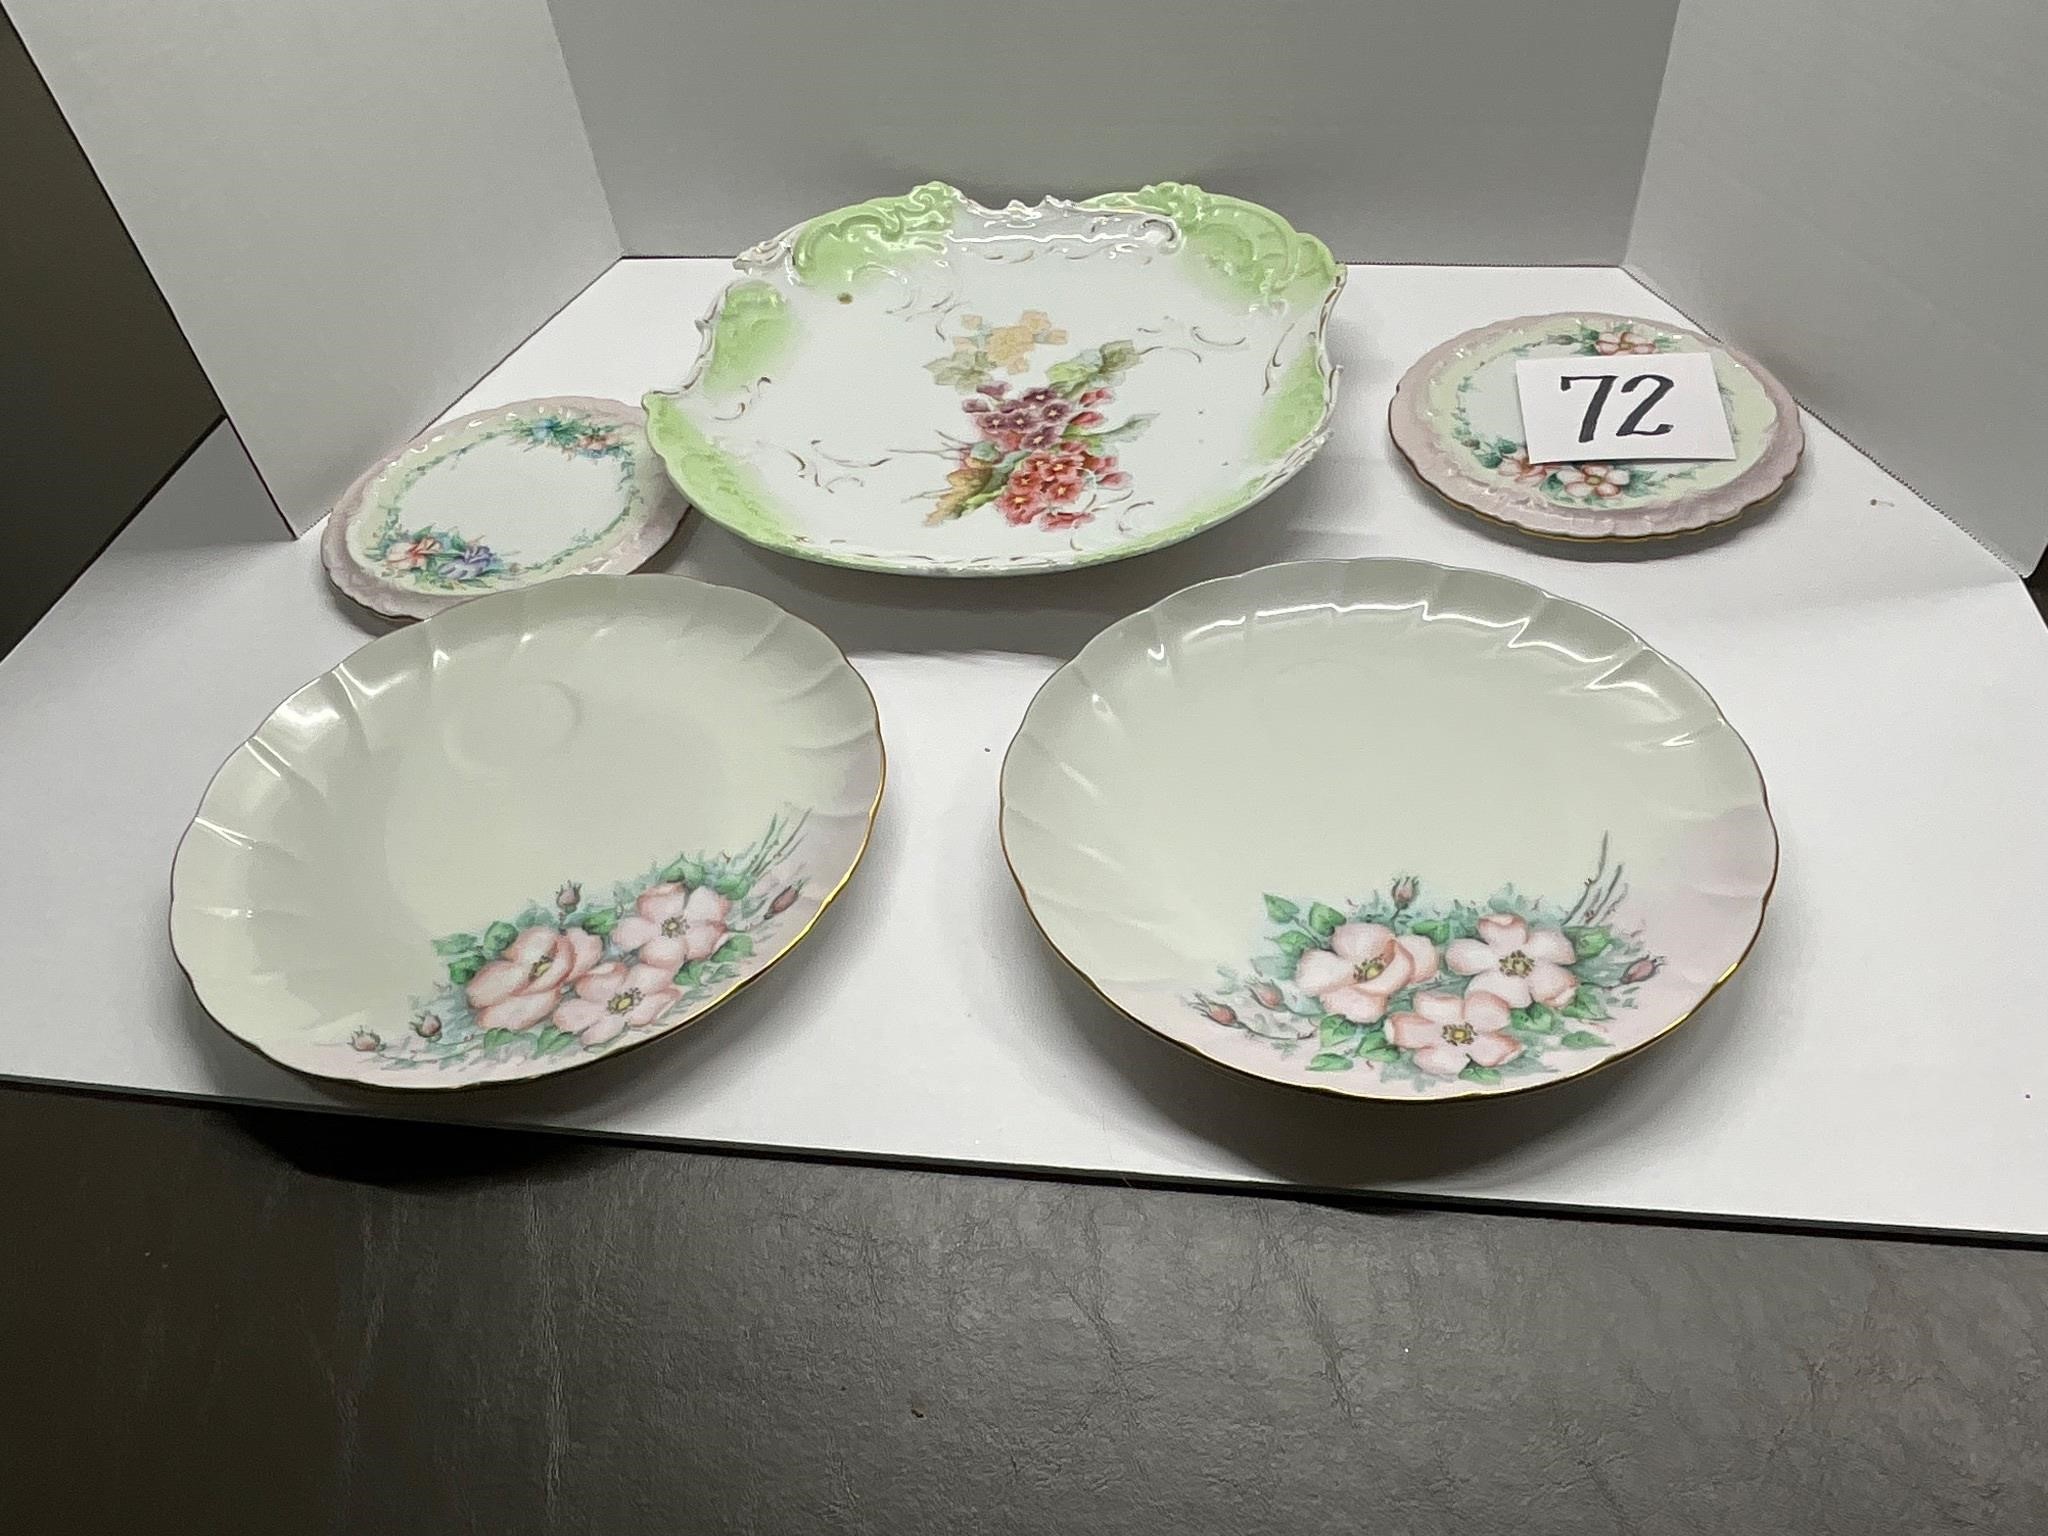 Lot of 5 Hand Painted Plates